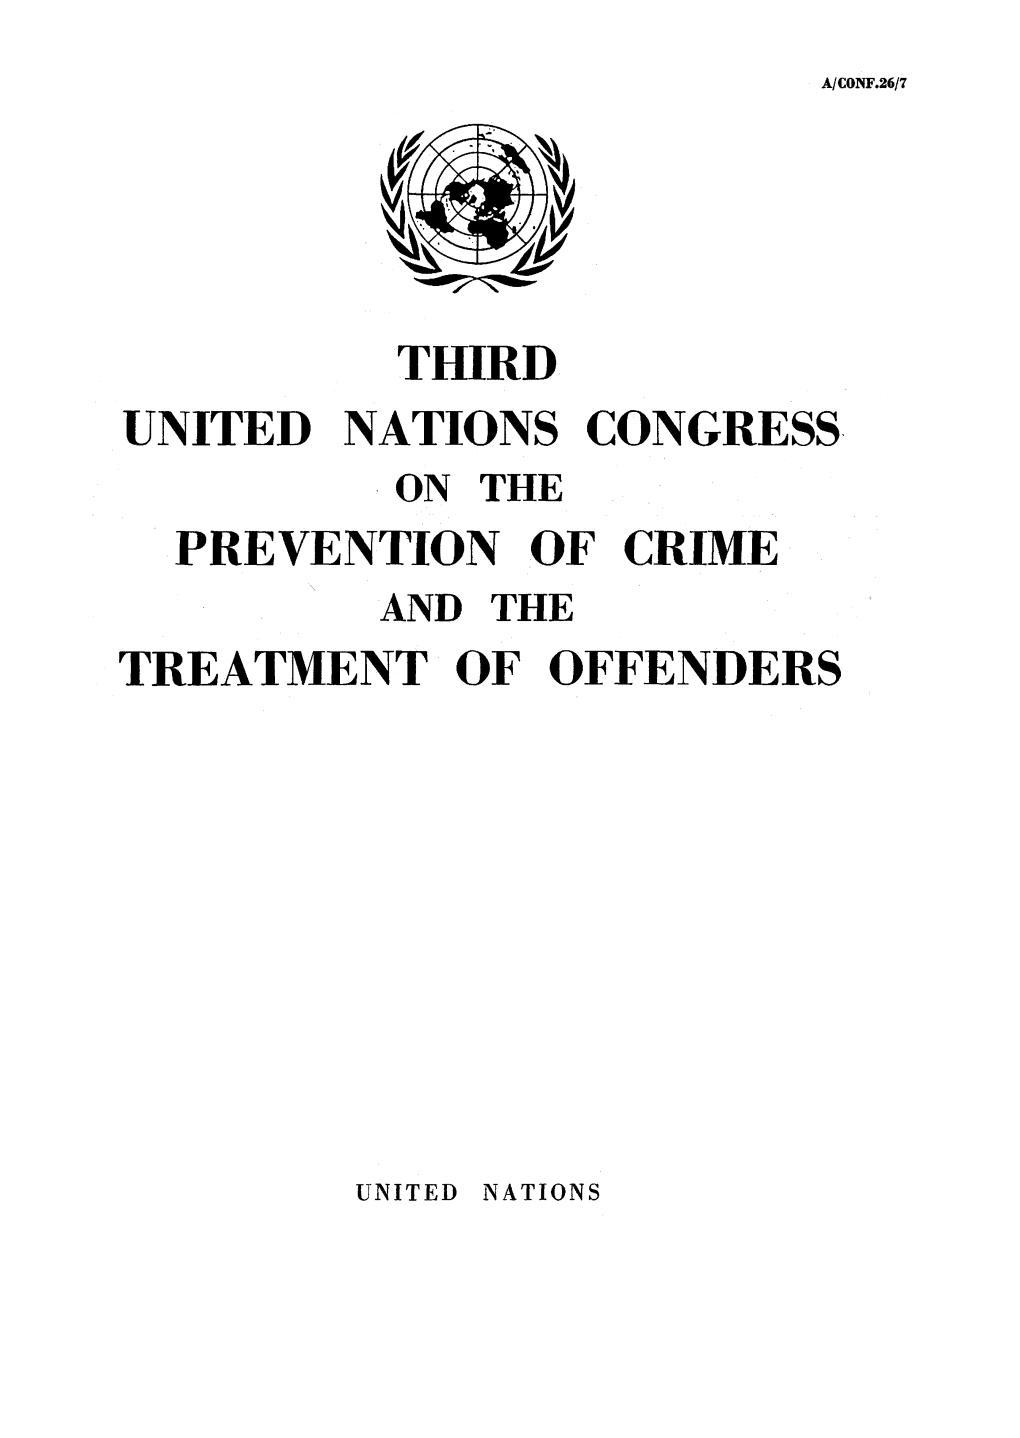 Third United Nations Congress on the Prevention of Crime and the Treatment of Offenders